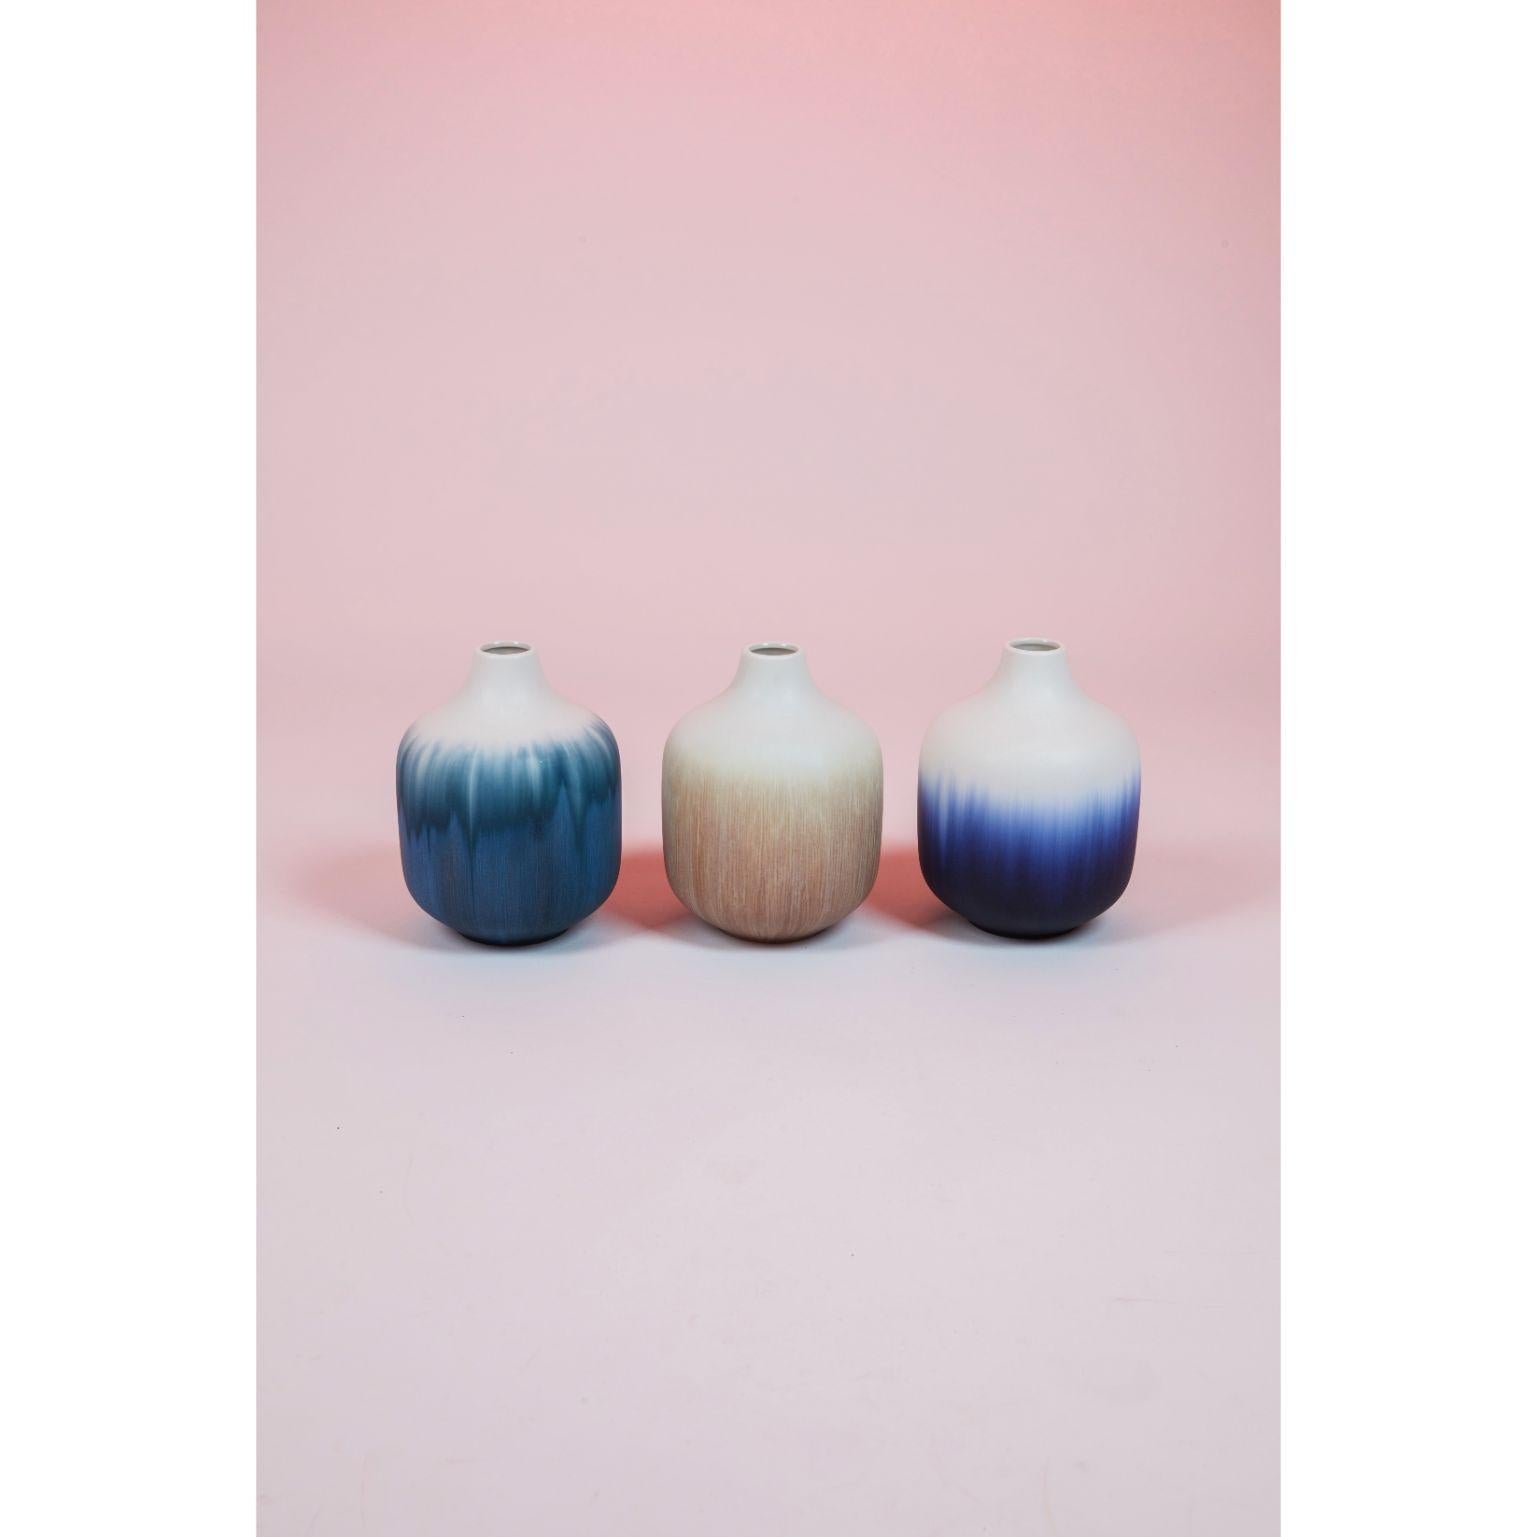 A set of 3 element vases - Short by Milan Pekar
Dimensions: D16 x H21 cm
Materials: Glaze, porcelain

Hand crafted in the Czech Republic. 

Also available: Different colors and patterns.

Established own studio August 2009 – Focus mainly on